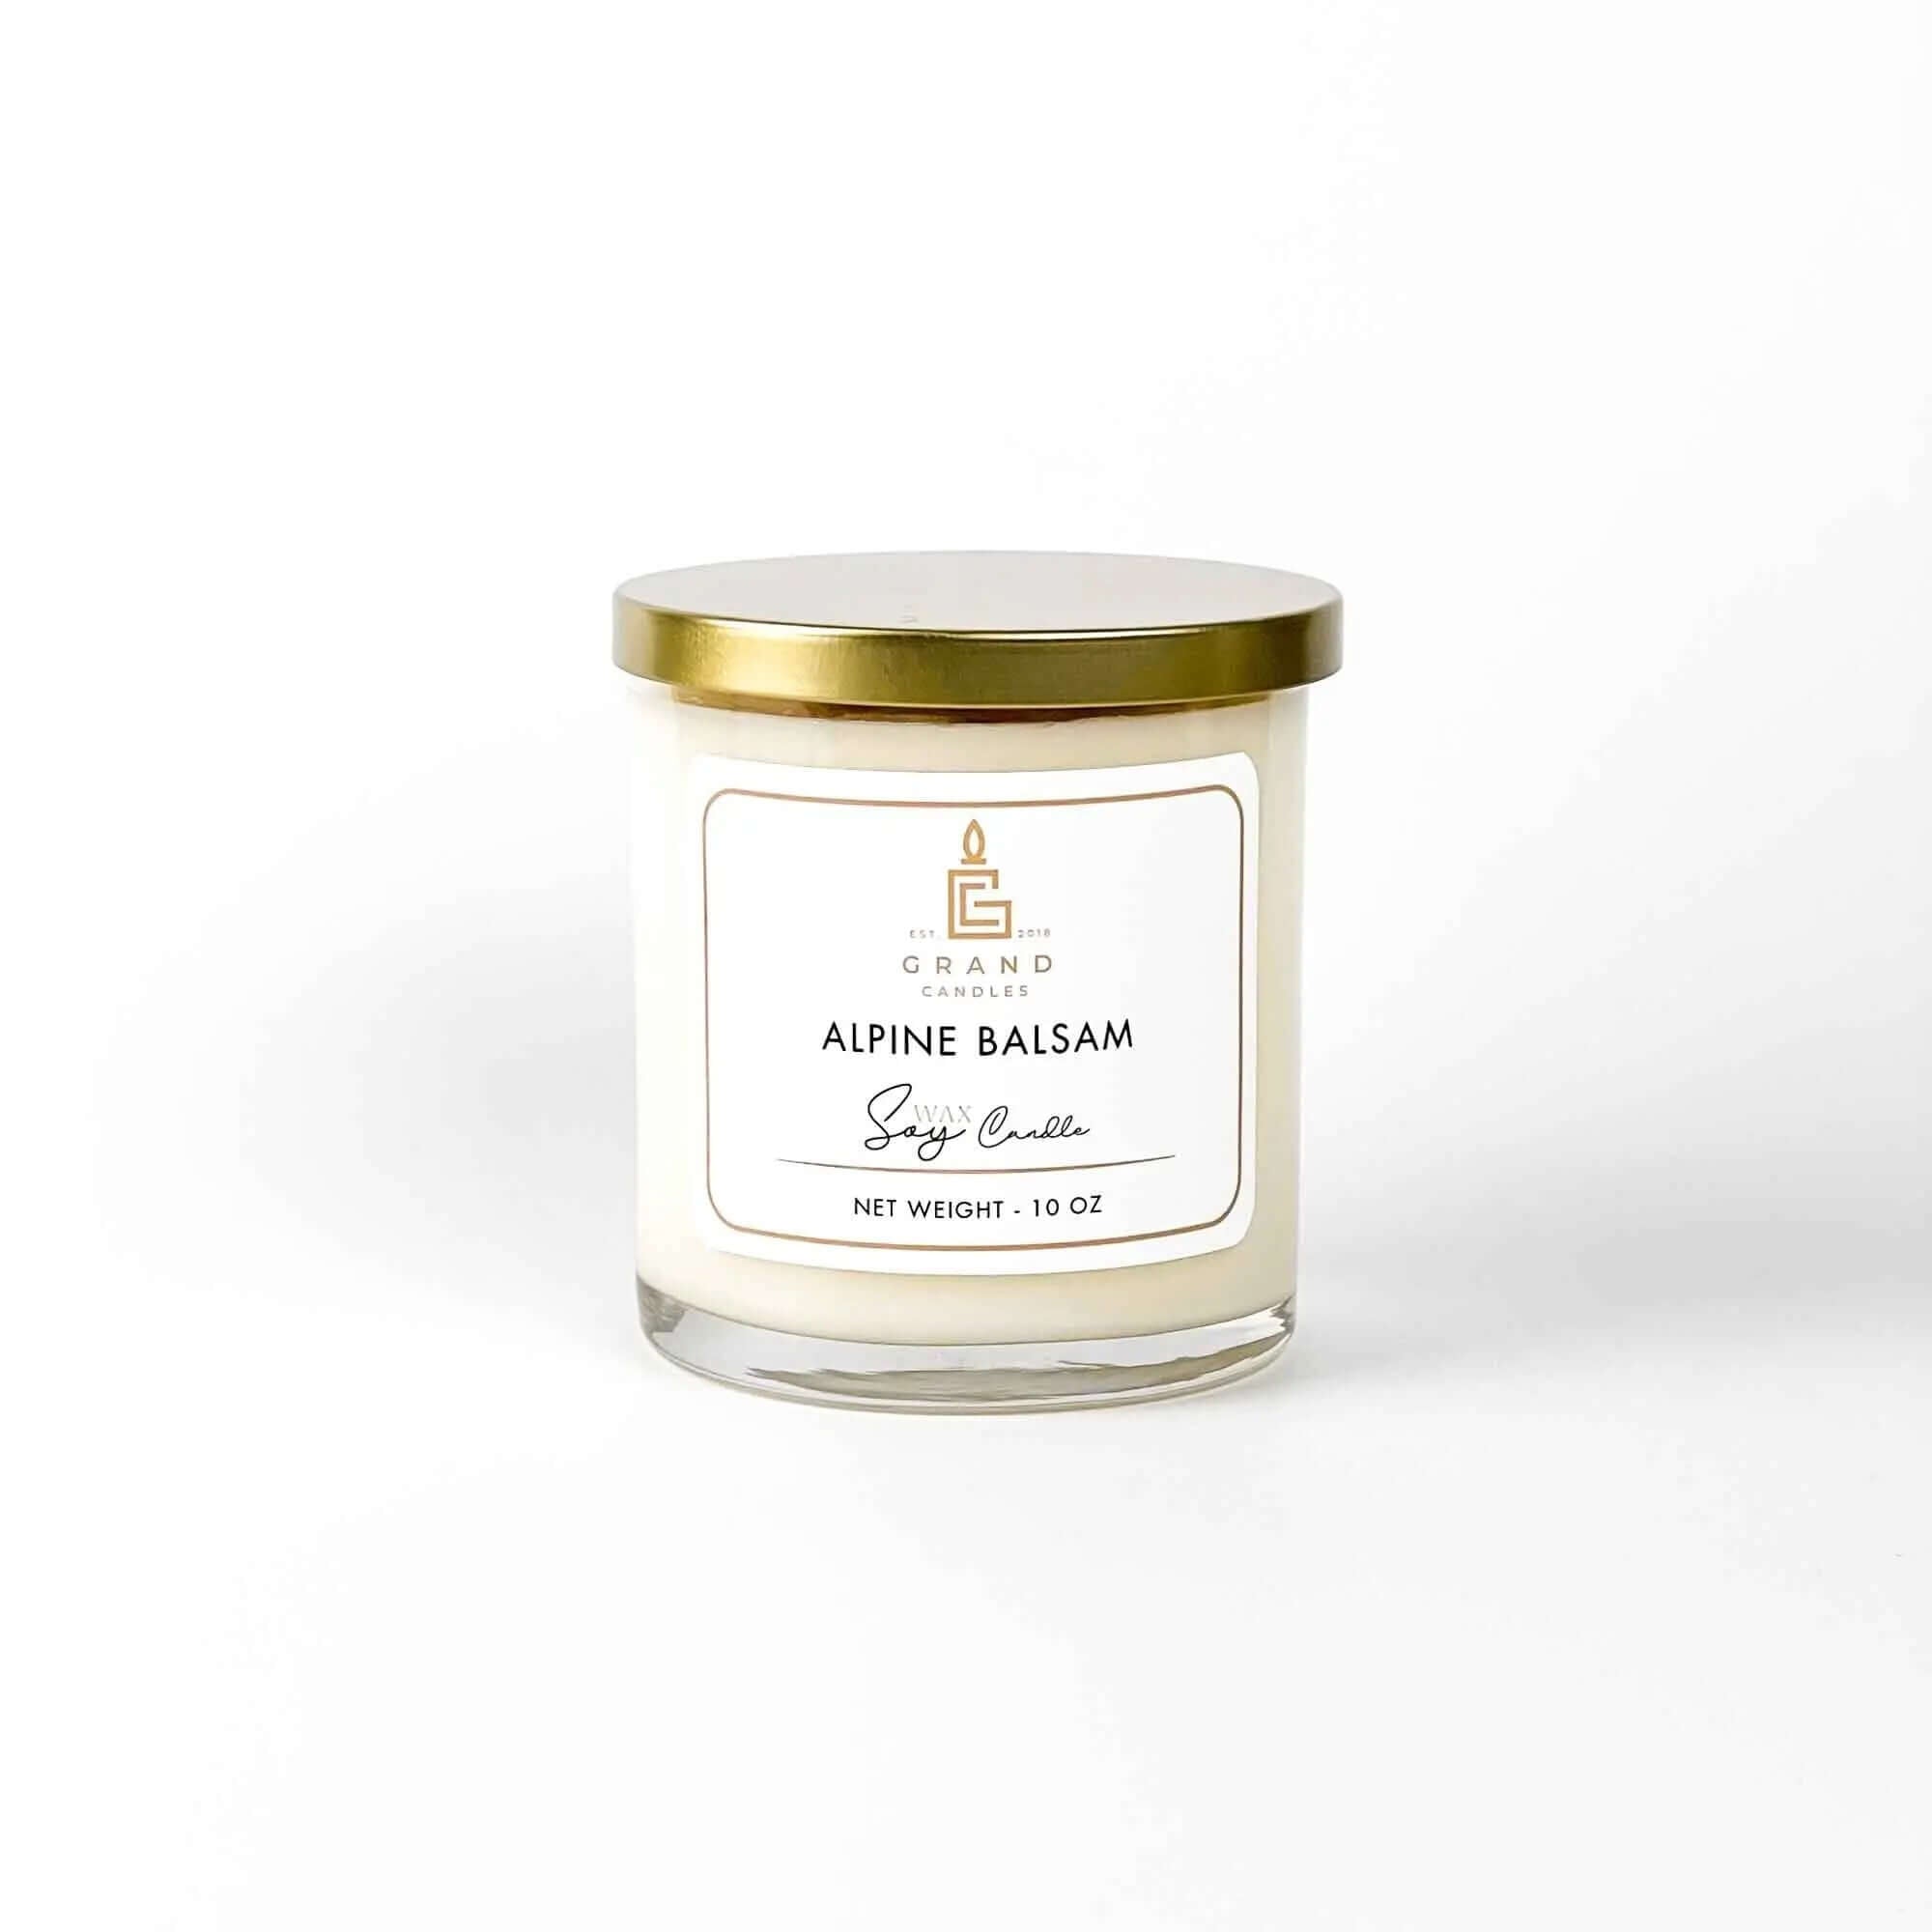 Alpine Balsam Scented Soy Candle | Handmade Scented Soy Wax Candle | Refreshing Home Scent